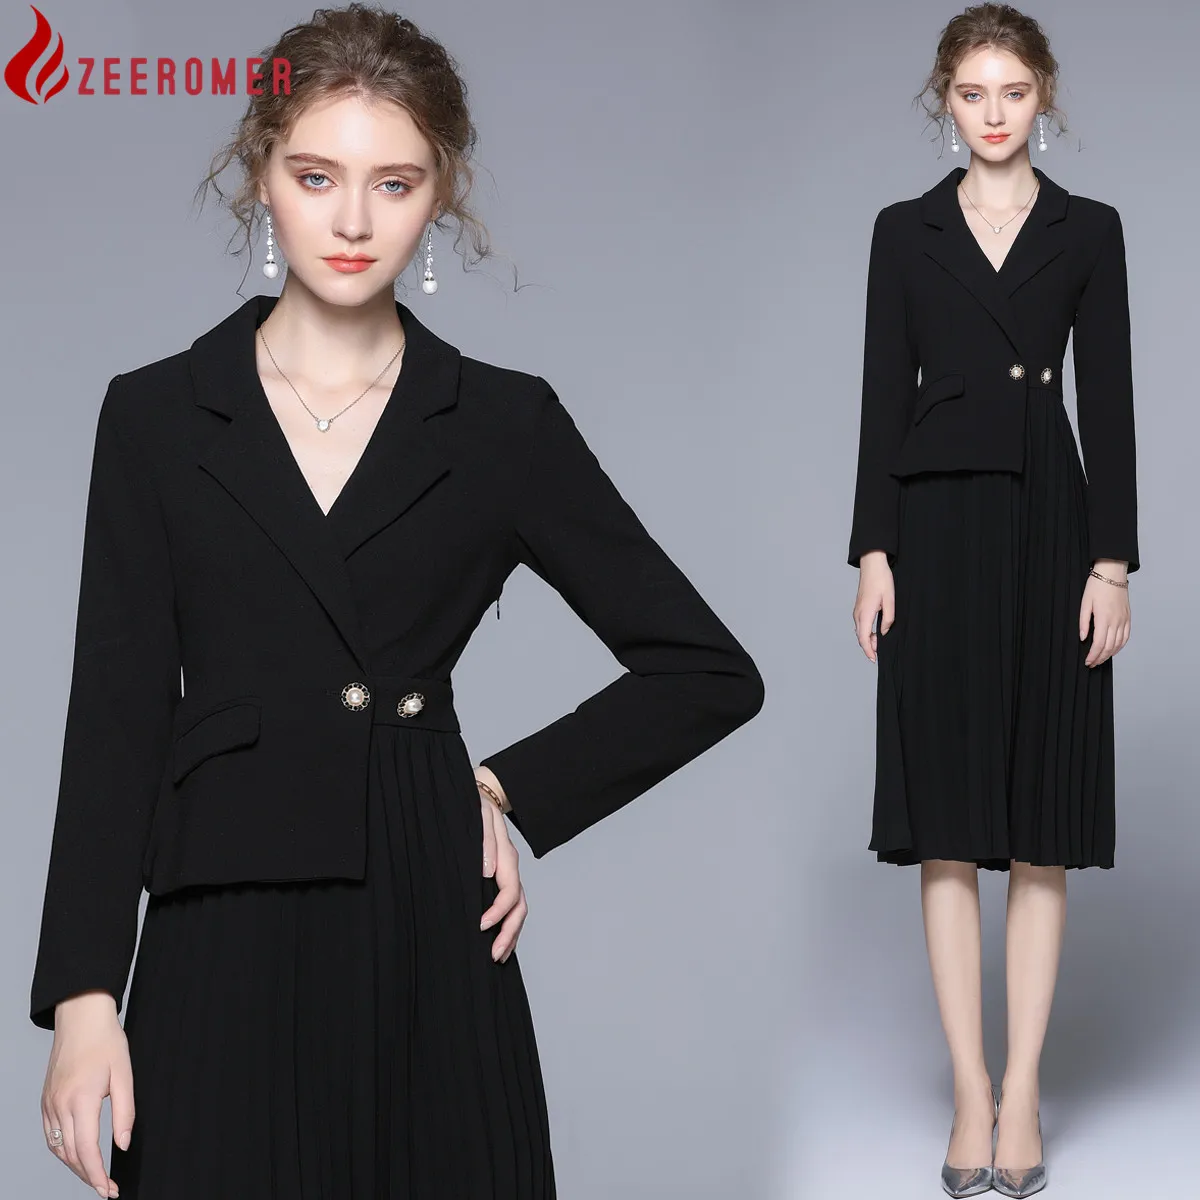 Summer High-End Temperament Suit Dress Women Notched Collar Long Sleeve Double Breasted Pleated Dress Lady Slim Party Midi Dress